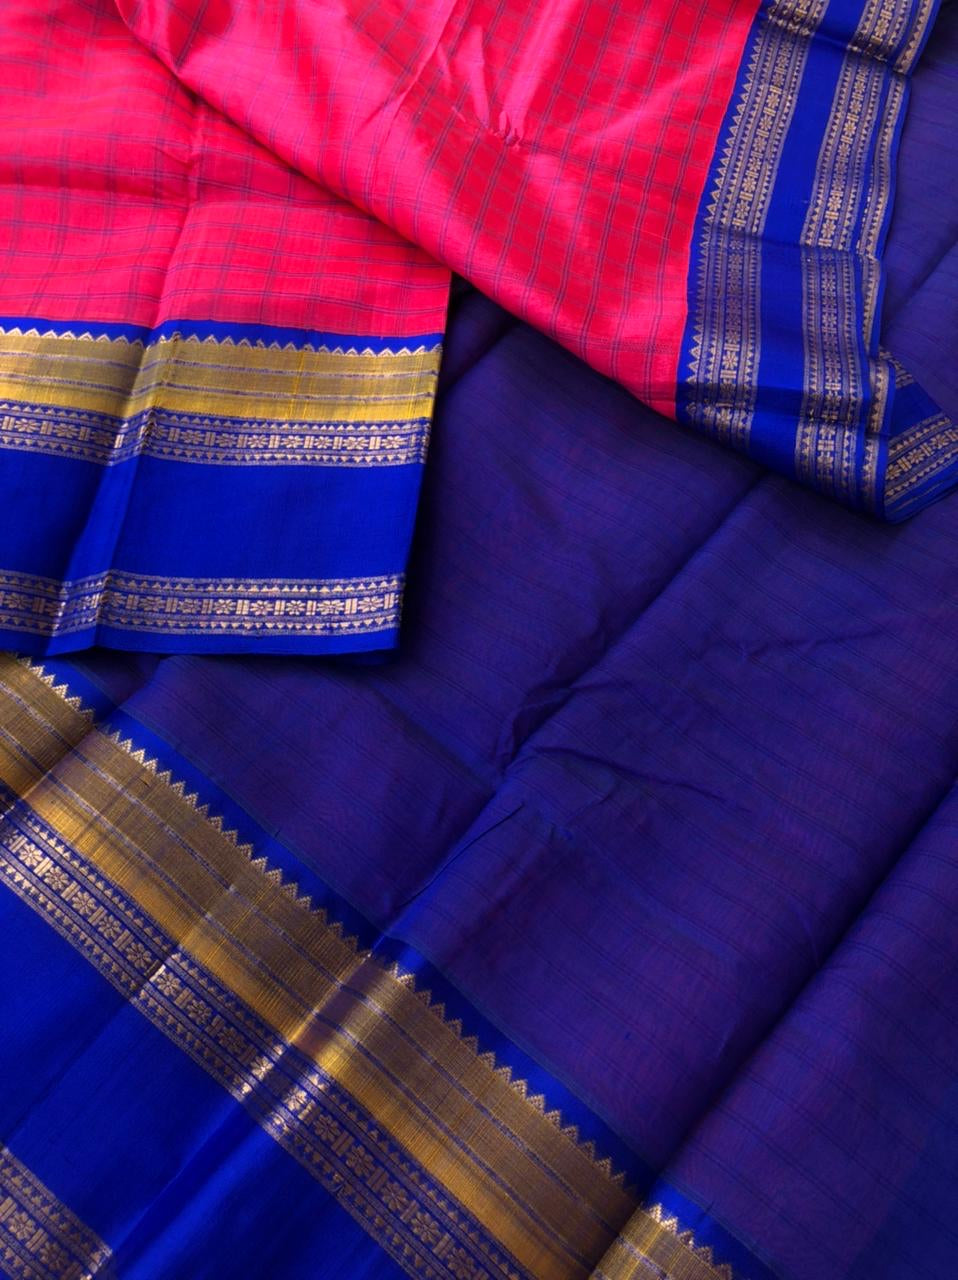 Divyam - Korvai Silk Cotton with Pure Silk Woven Borders - stunning candy pink and ink blue chexs